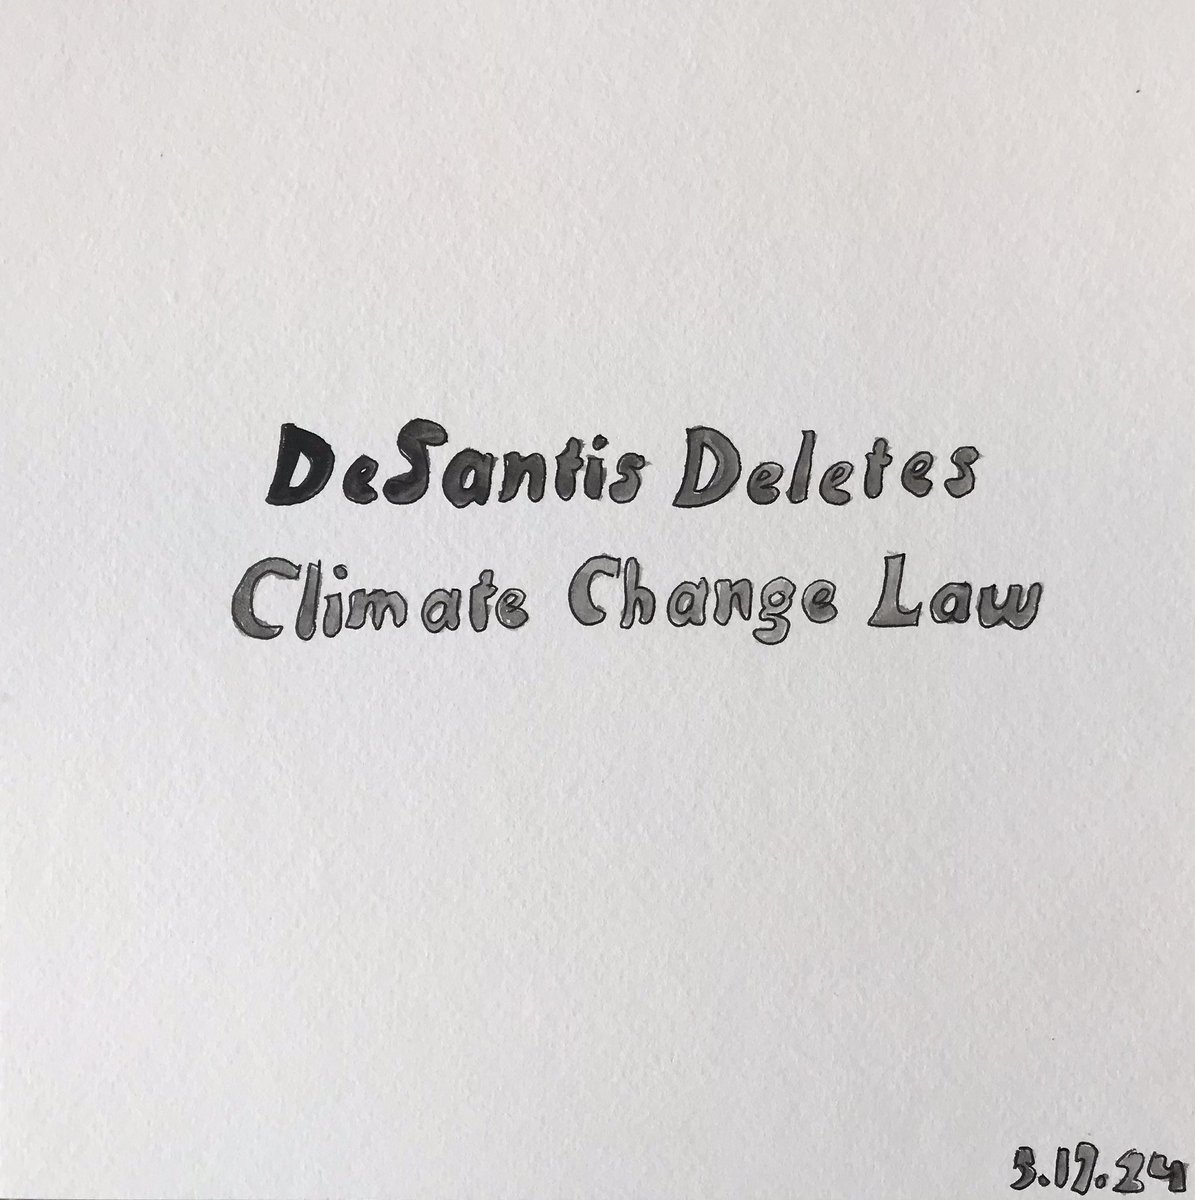 #DeSantisDeletesClimateChangeLaw #NYT #May17_24 . #DeSantis Signs Law Deleting #ClimateChange from #Florida Policy nytimes.com/2024/05/15/cli…